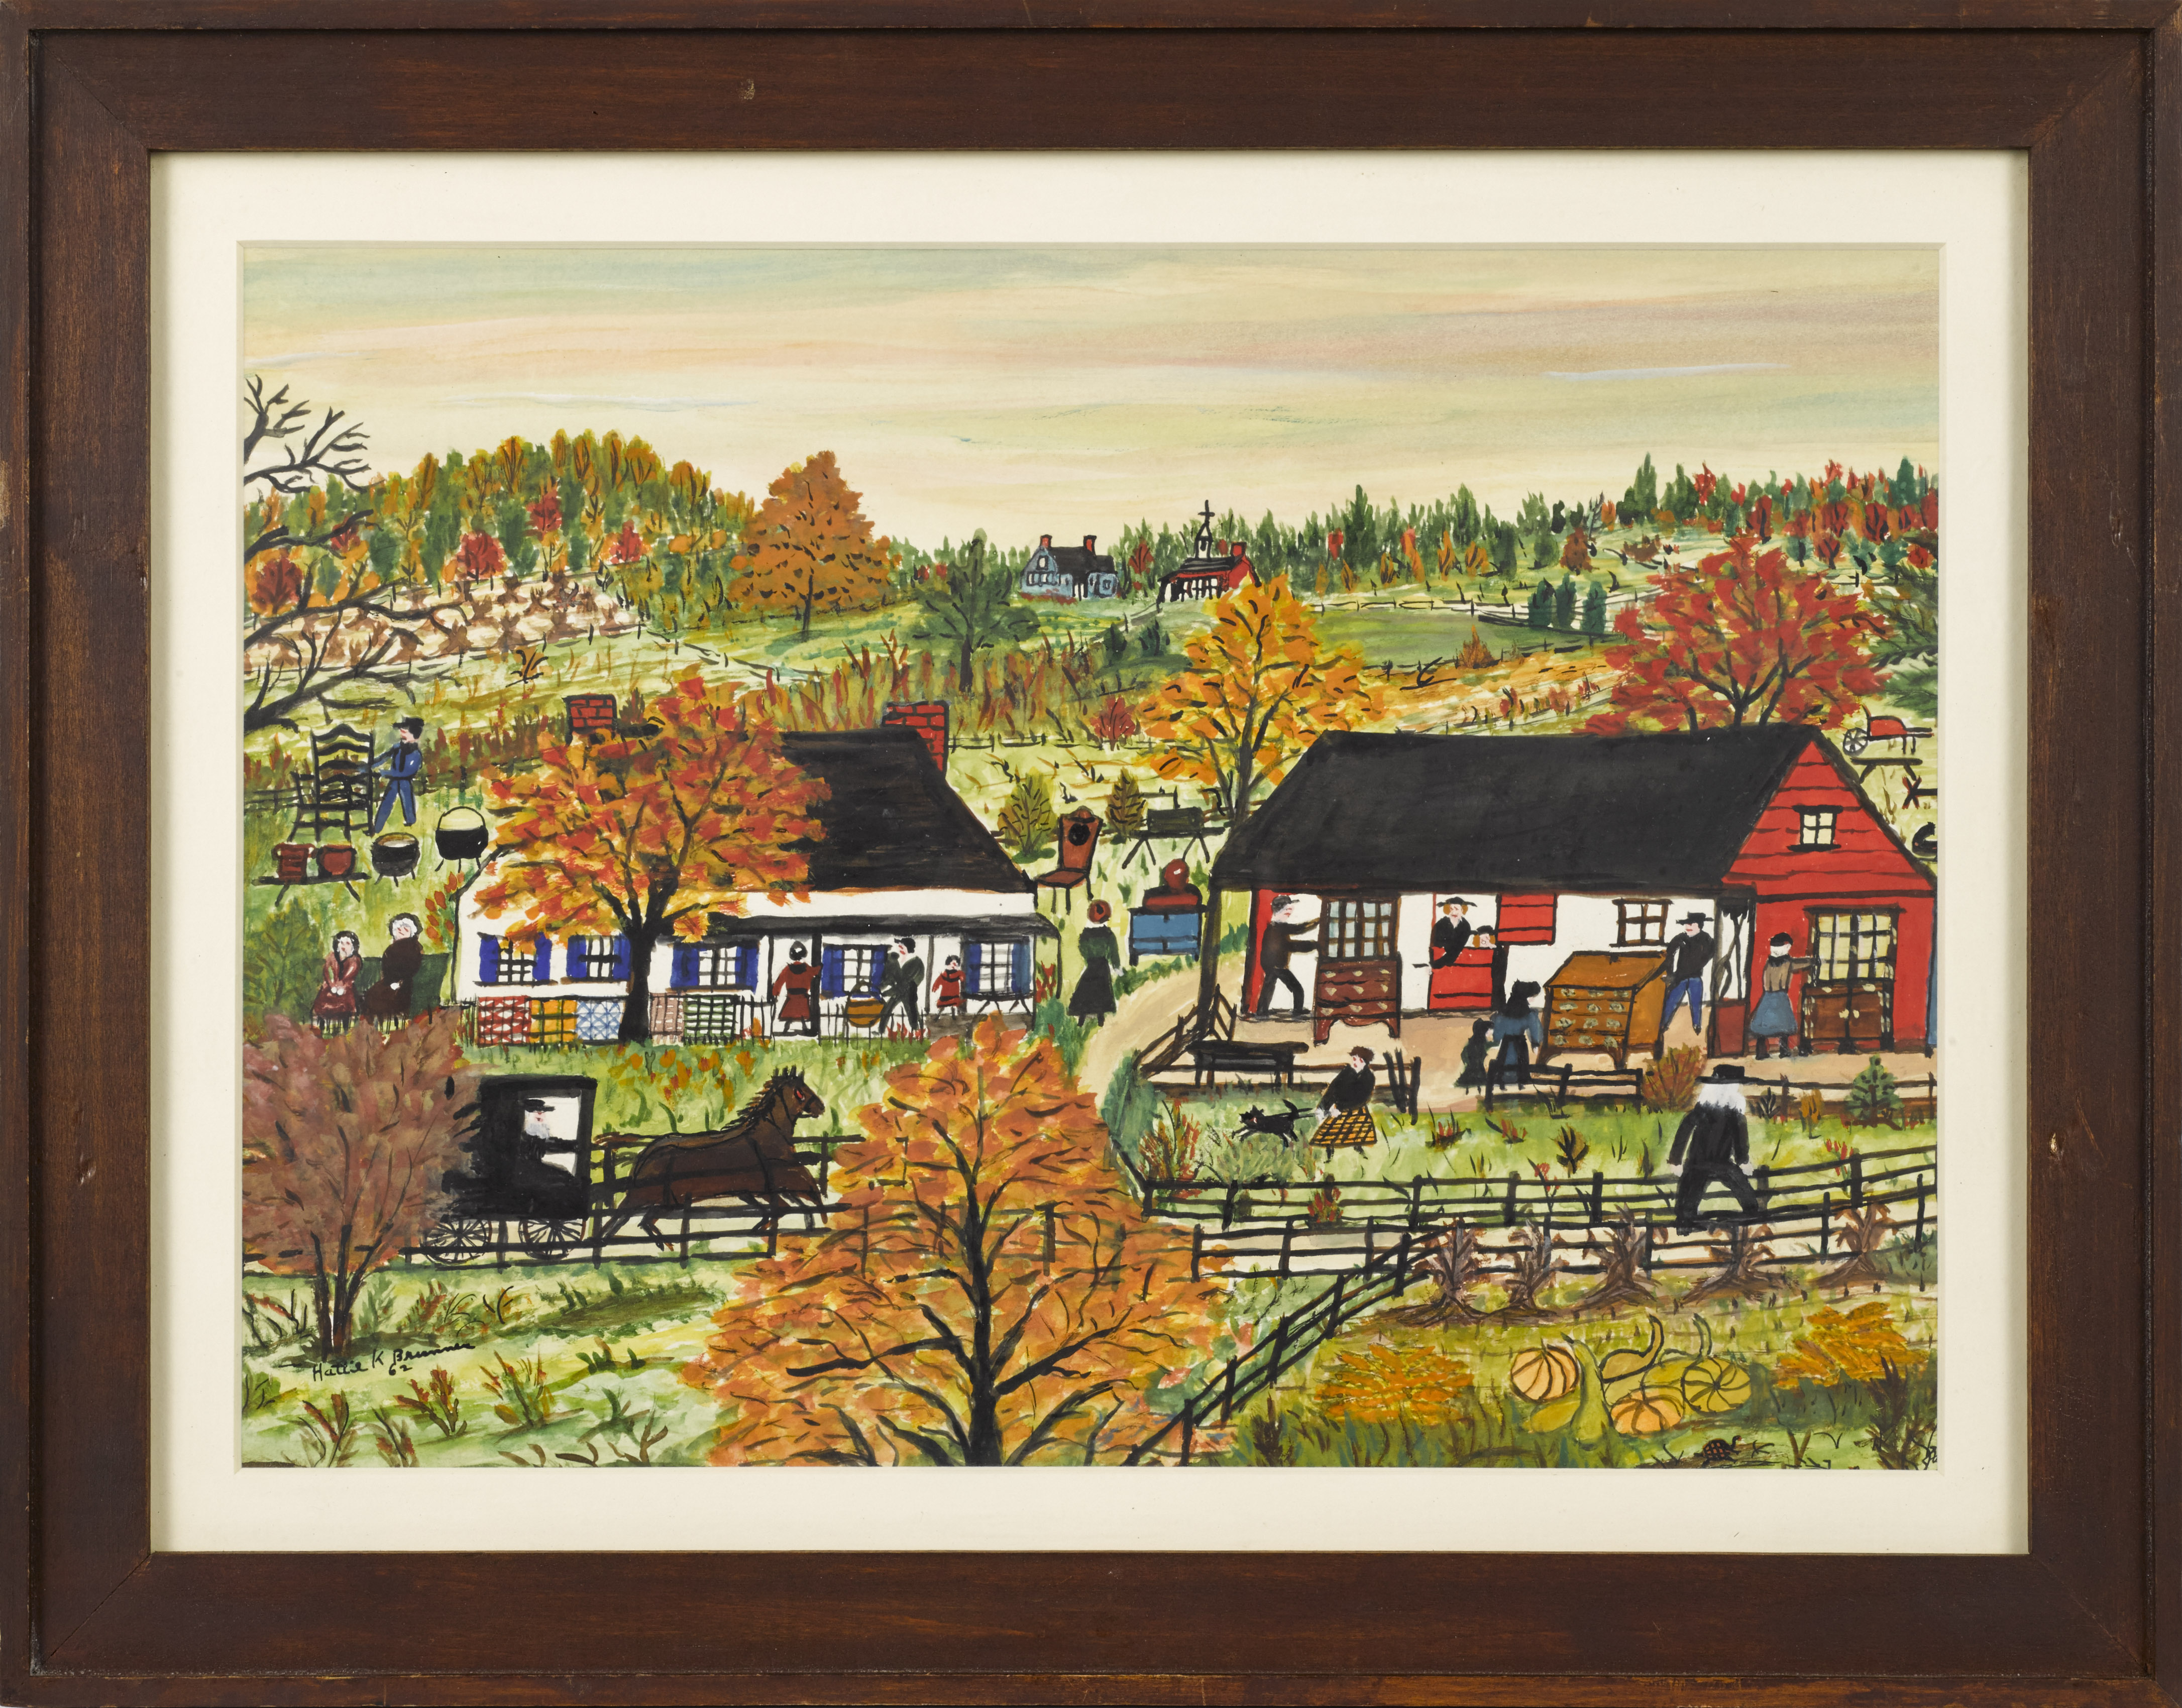 Hattie Klapp Brunner (American, 1889-1982) watercolor and gouache on paper painting, fall Amish auction scene, signed and dated '62 in lower left.